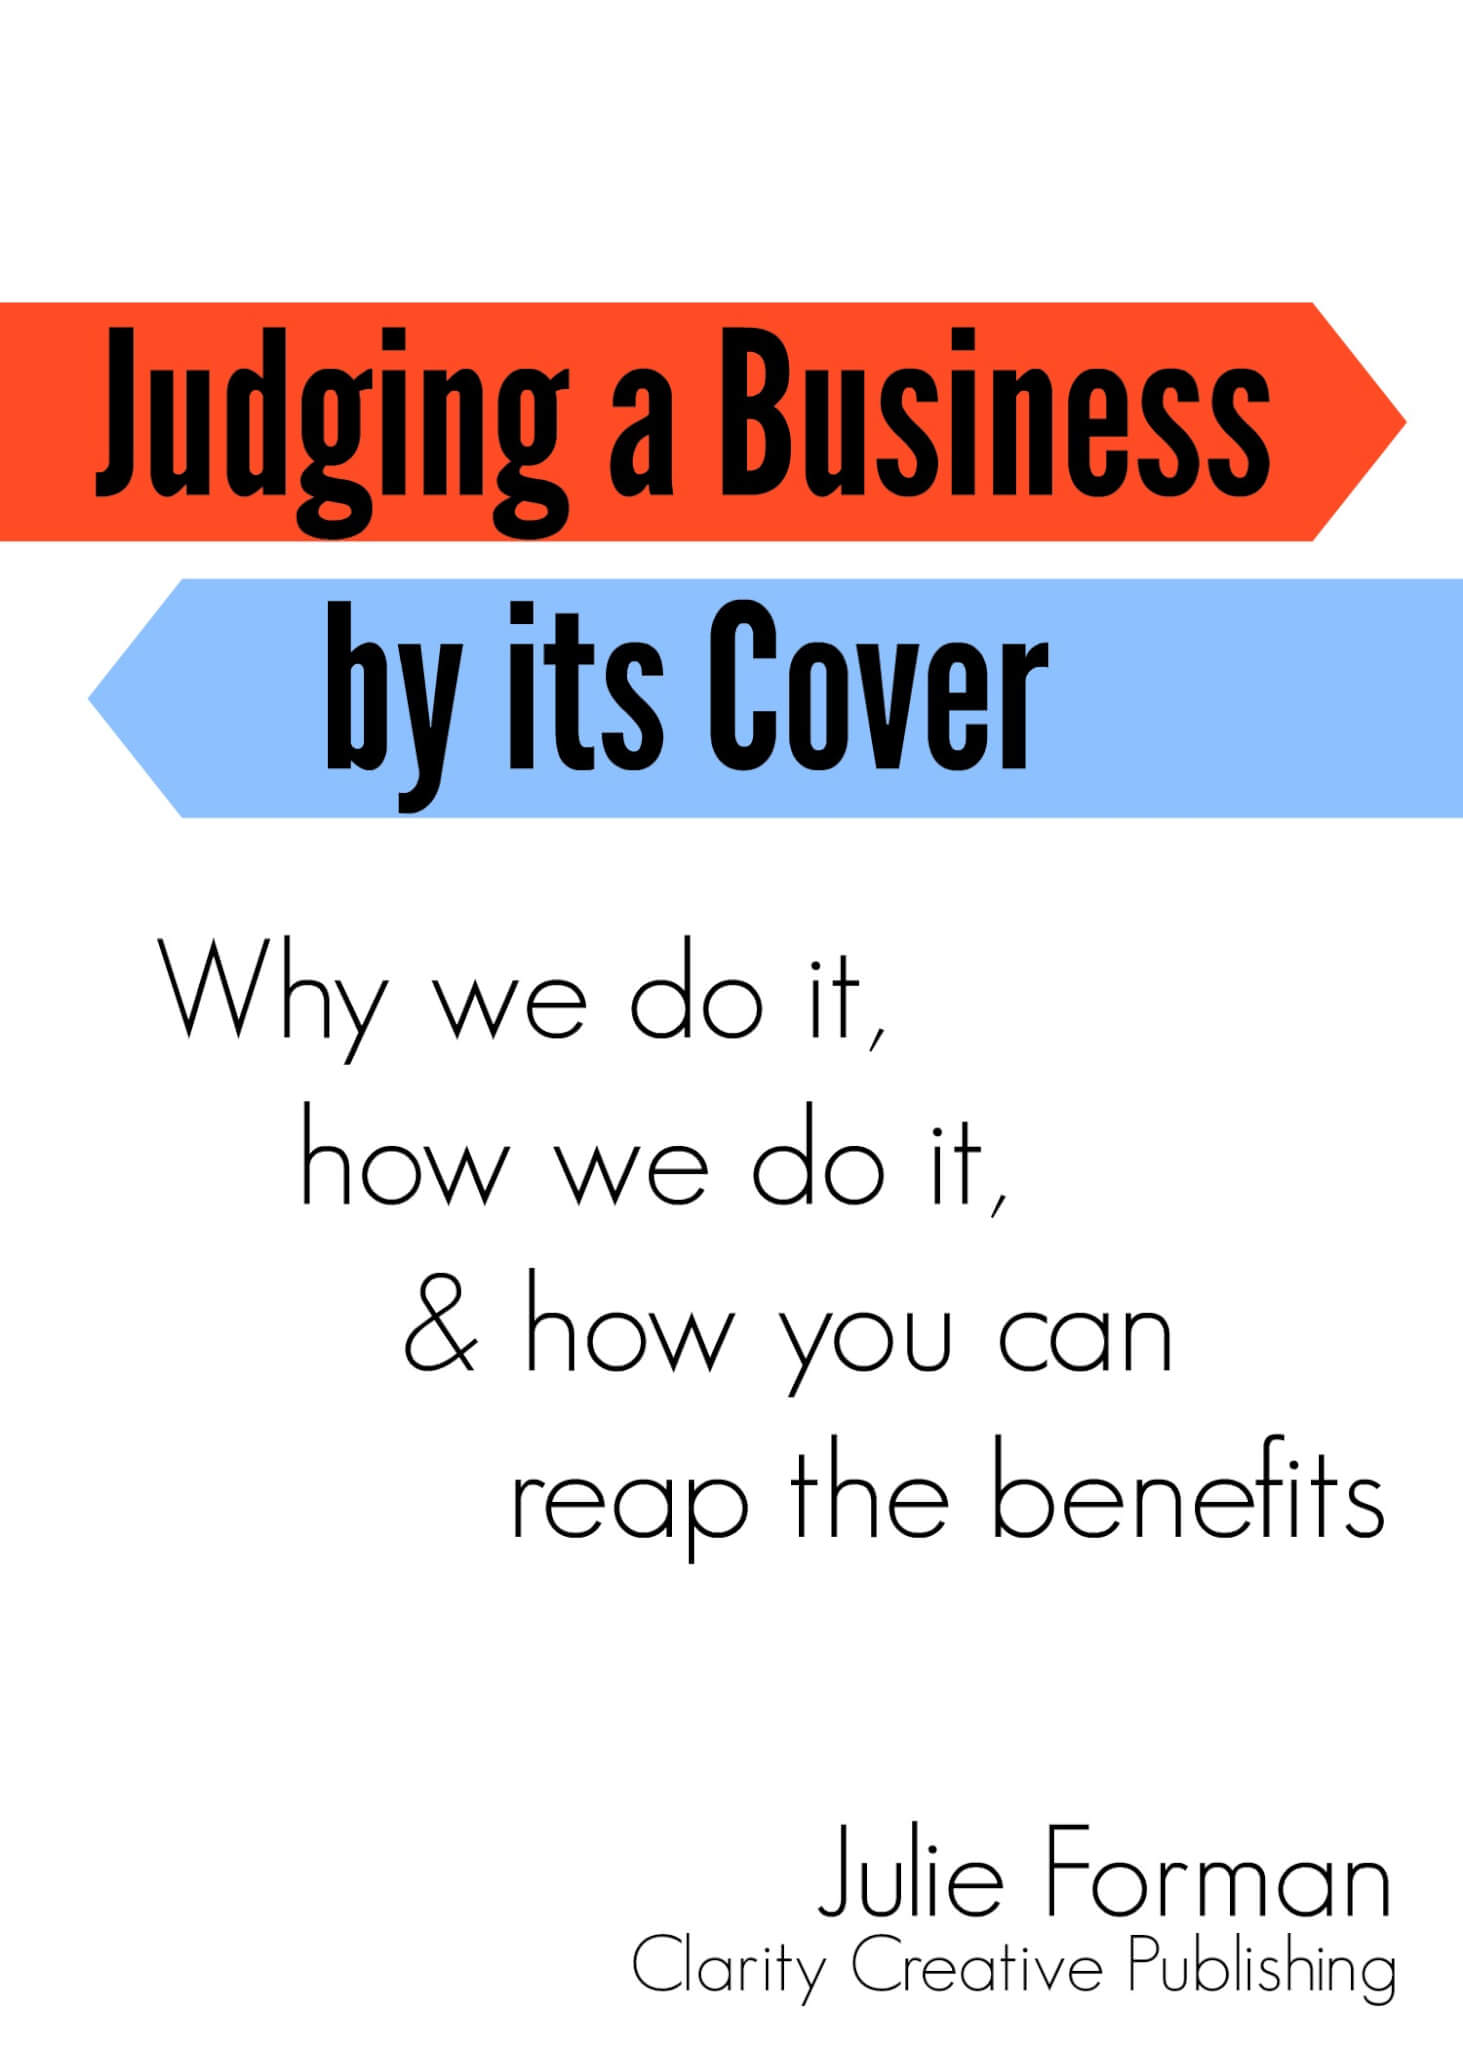 judging a business by its cover